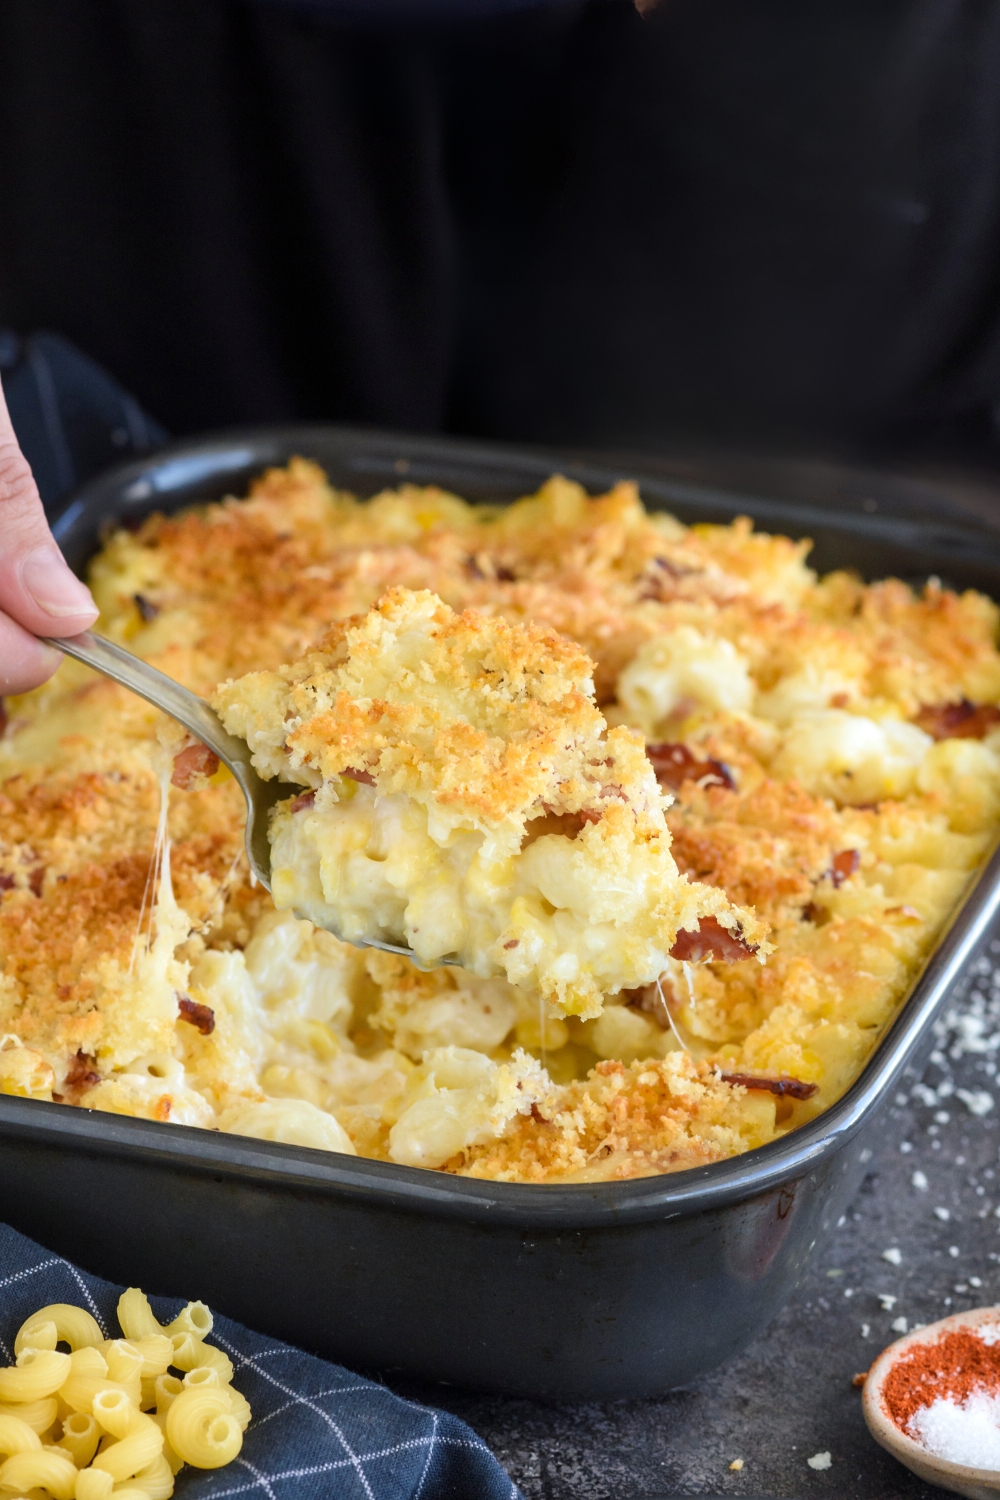 A casserole dish with macaroni corn casserole. A spoon is scooping a heaping scoop of the casserole.